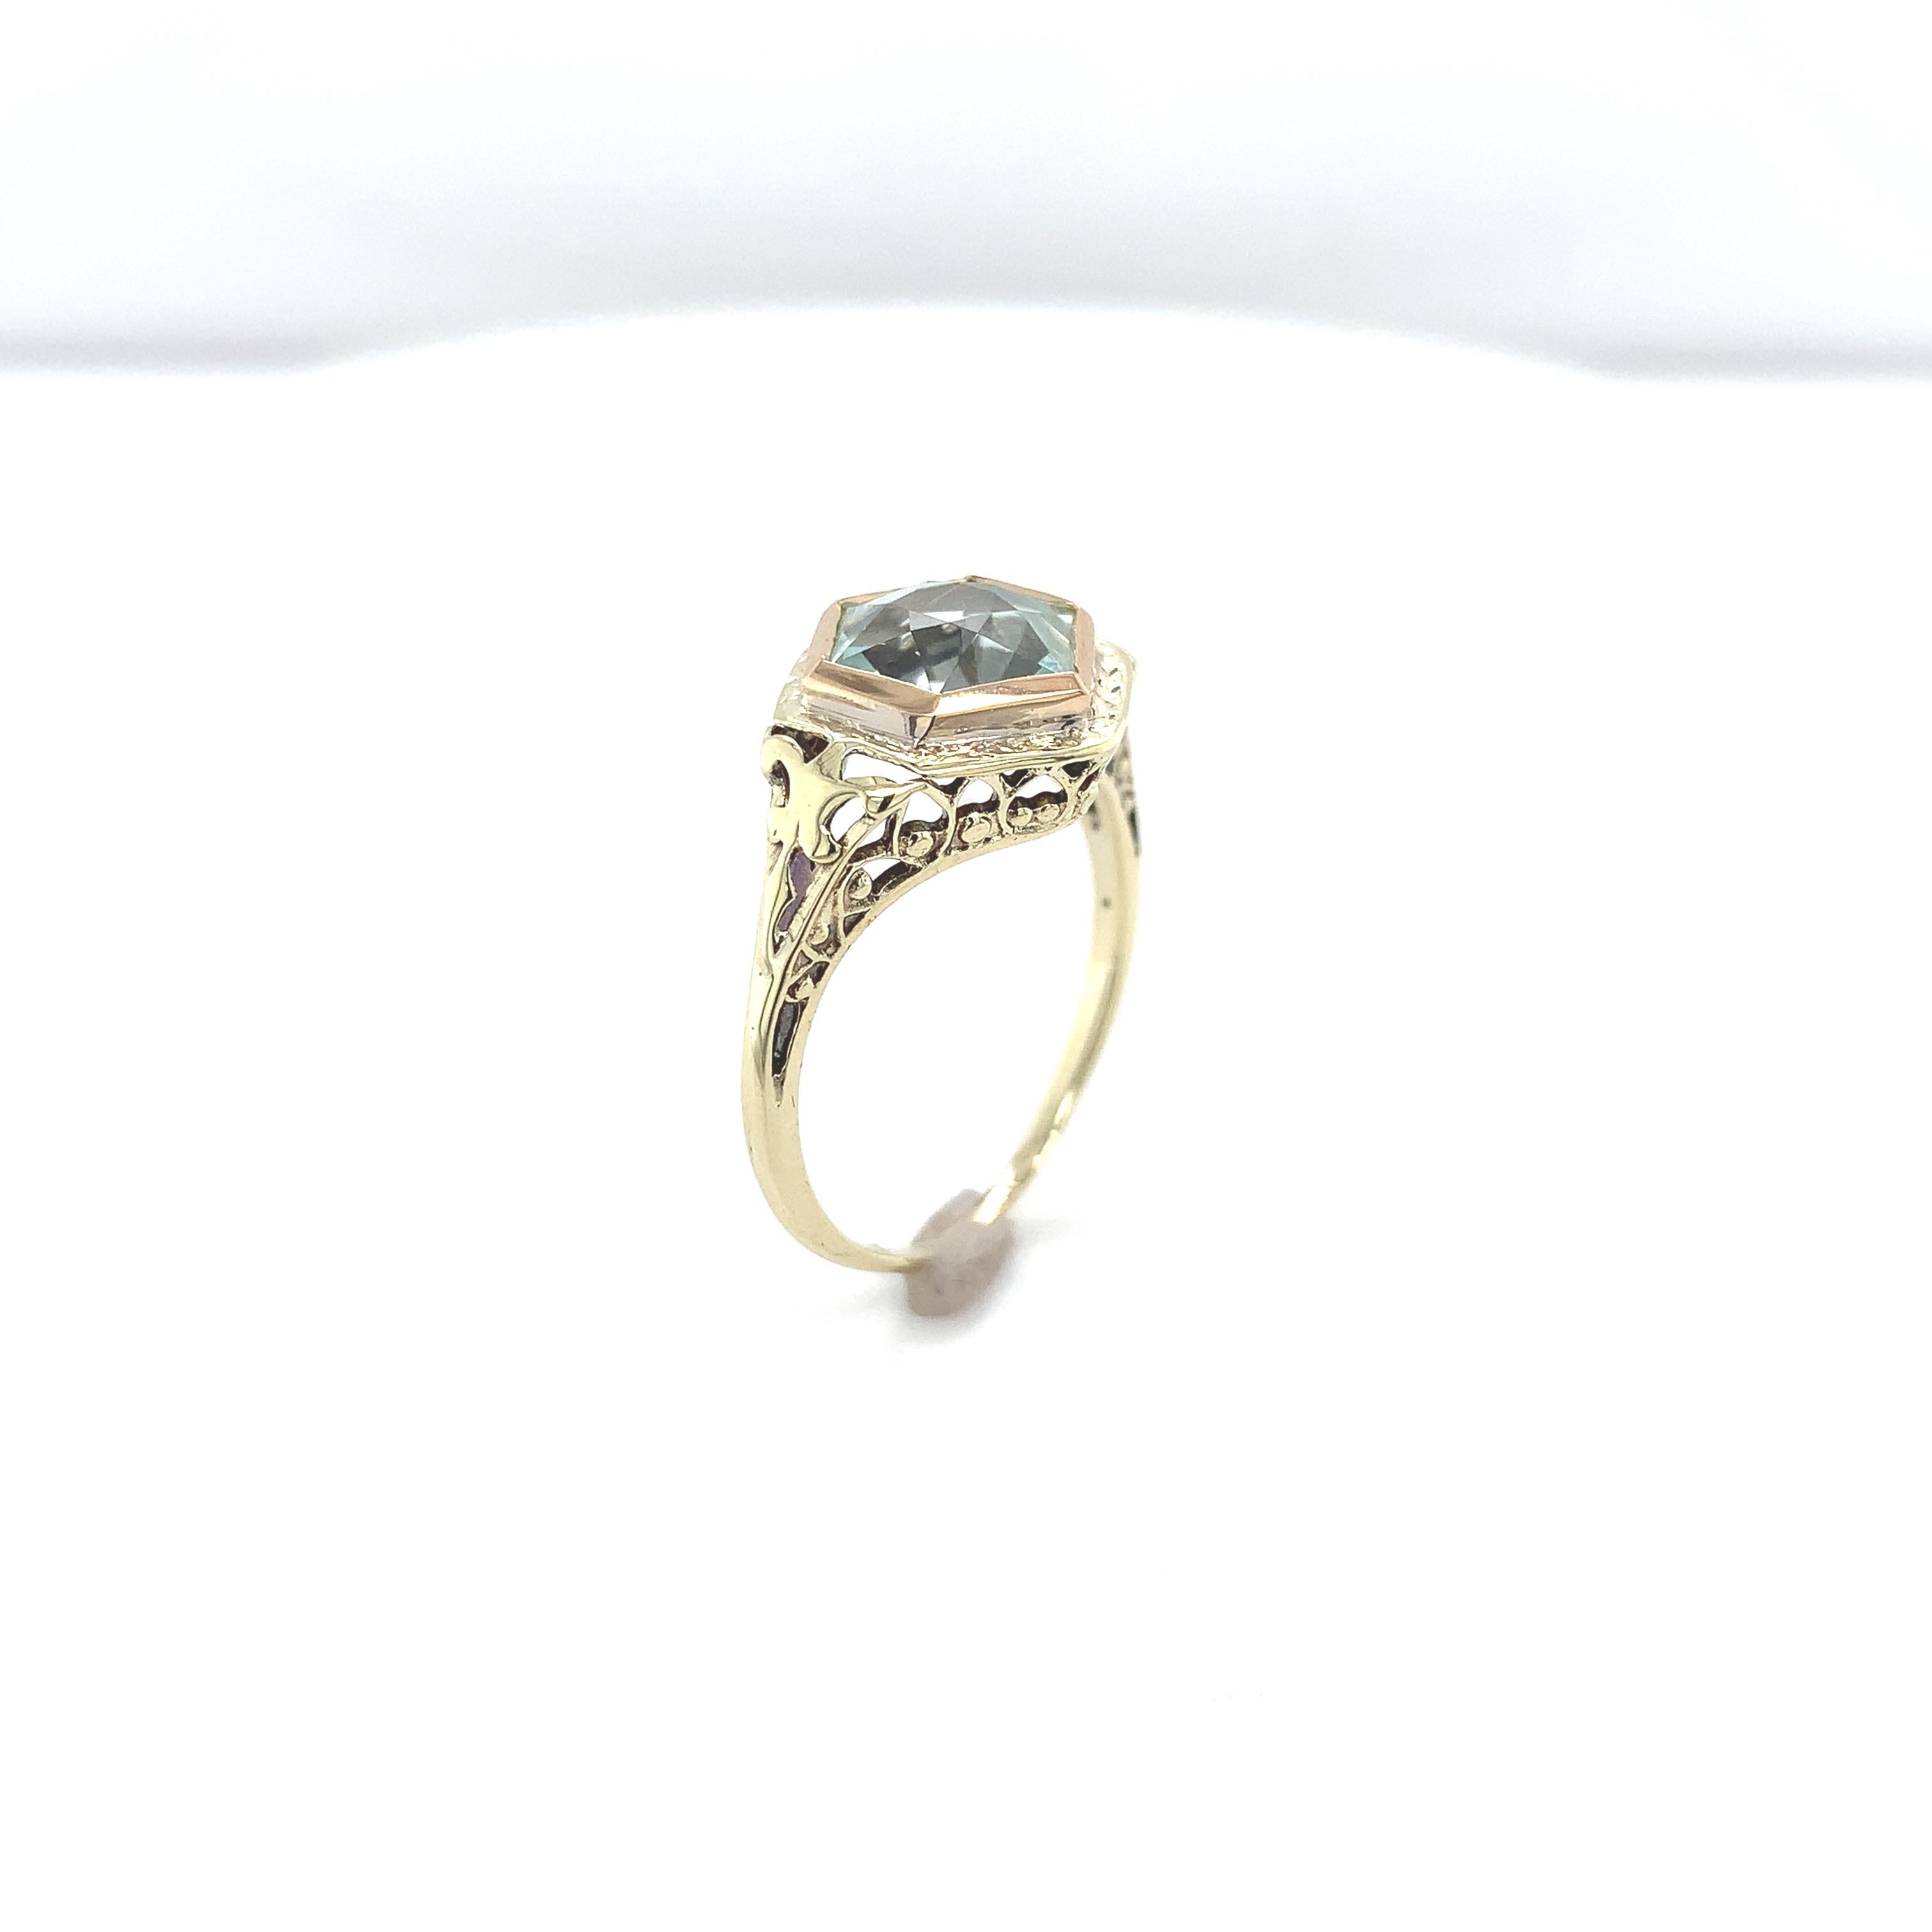 14K Yellow Gold Art Deco Filigree Ring with a Specialty Hexagon Cut Aquamarine In Good Condition For Sale In Big Bend, WI